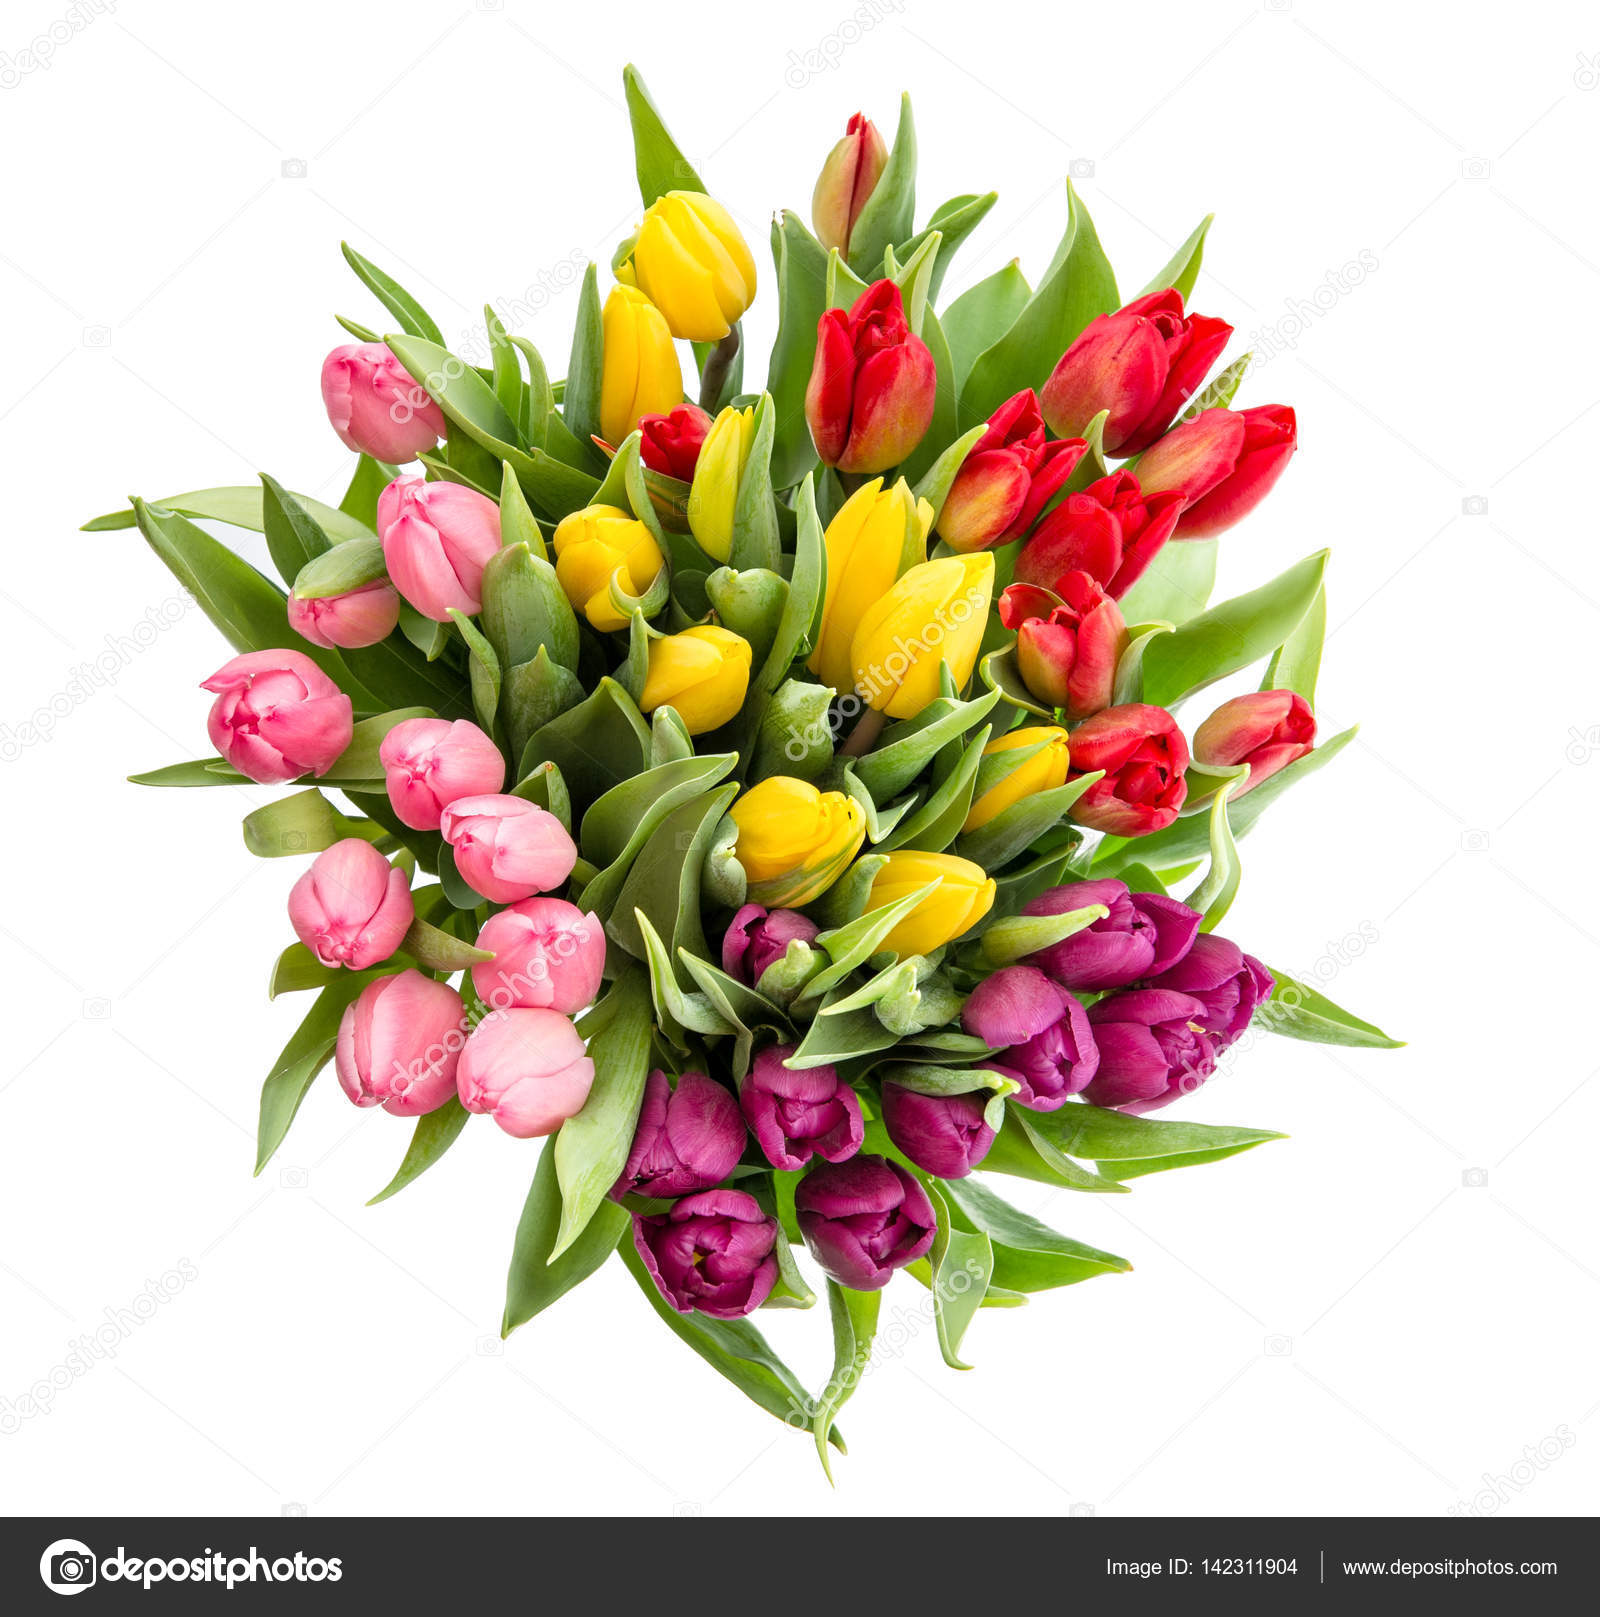 Tulip Flower Bouquet Isolated White Background Stock Photo C Liligraphie 142311904